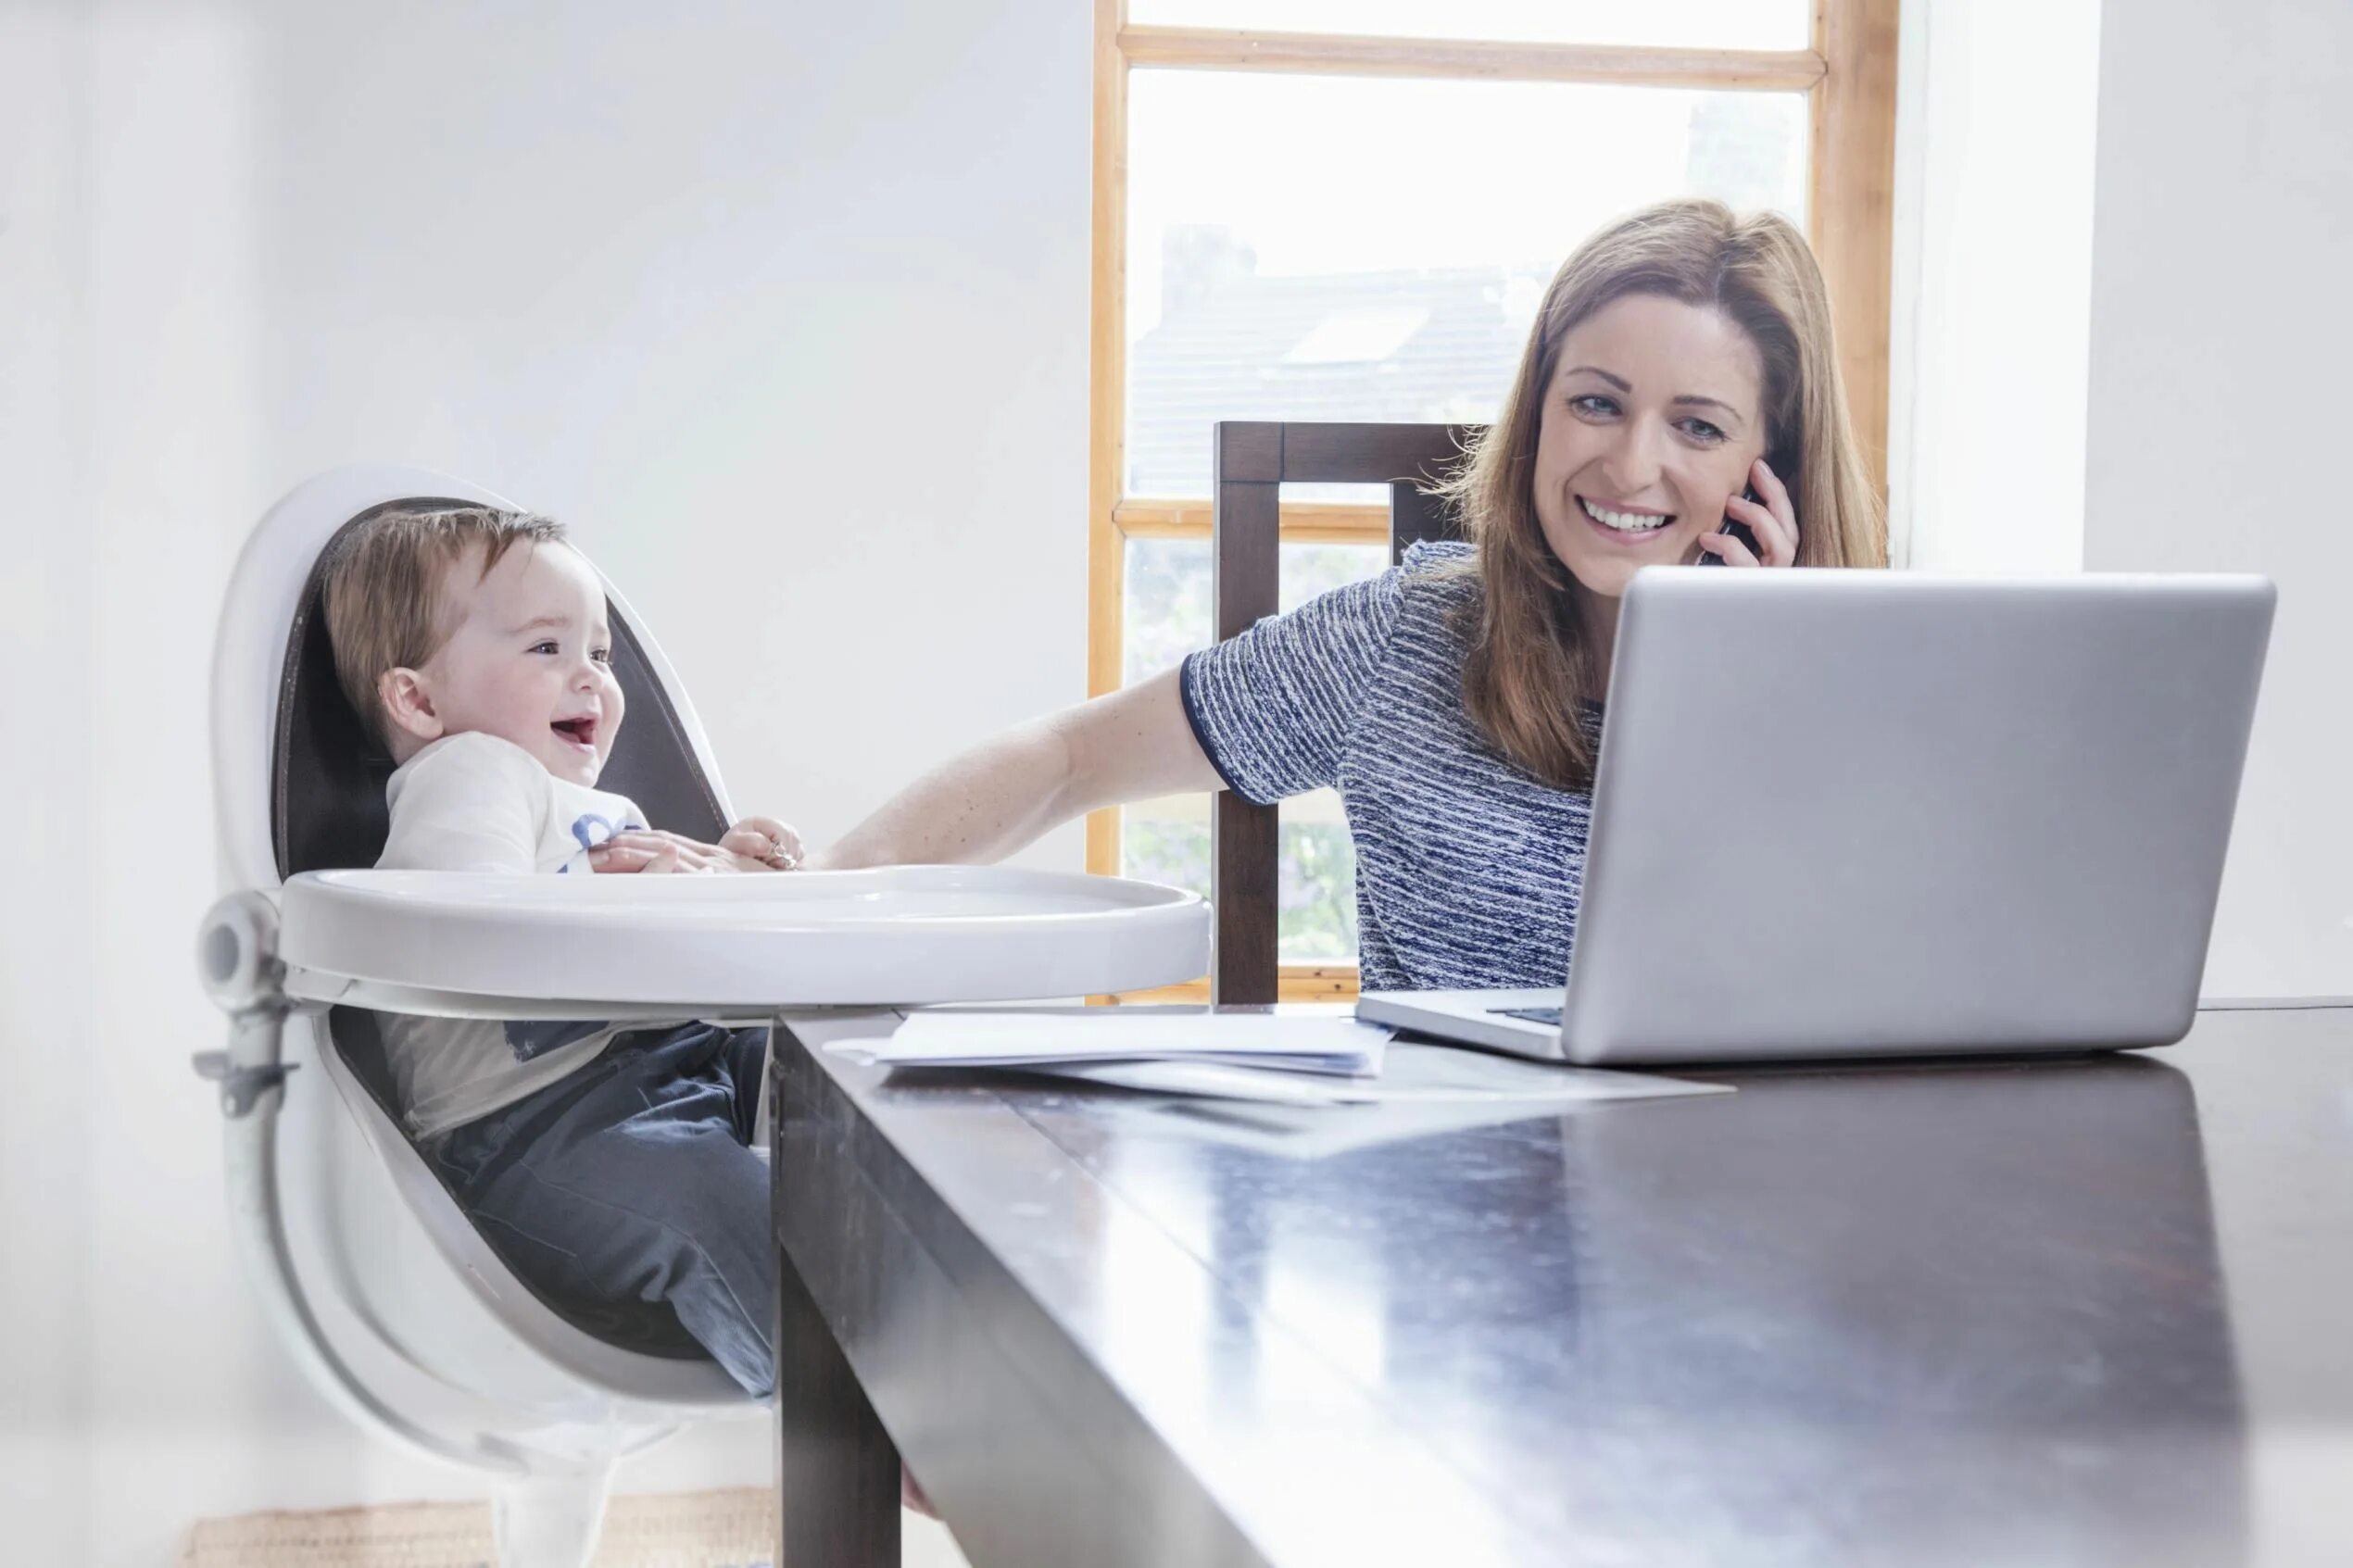 Stay at Home mom. Working from Home с детьми картинки. Balanced working from Home mom. Stay at Home and work. To stay at home working